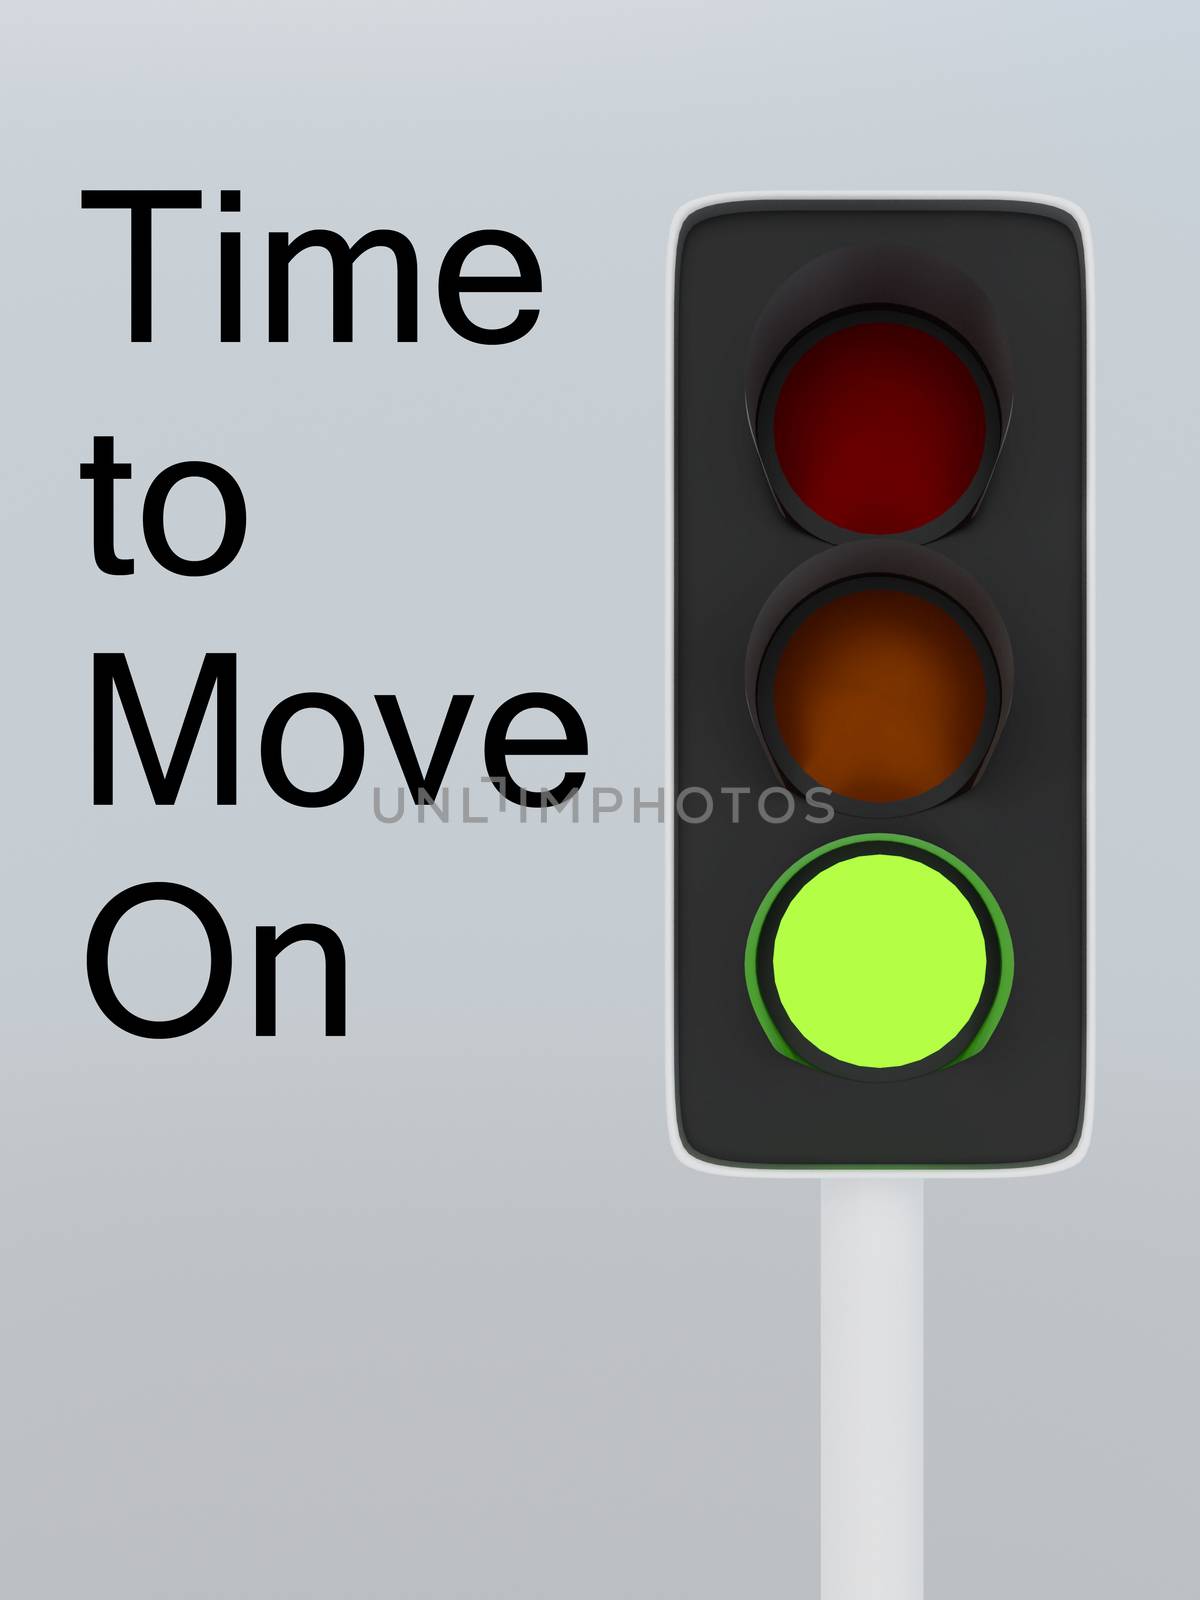 3D illustration of green traffic light along with encouraging text Time to Move On,
isolated over gray gradient.